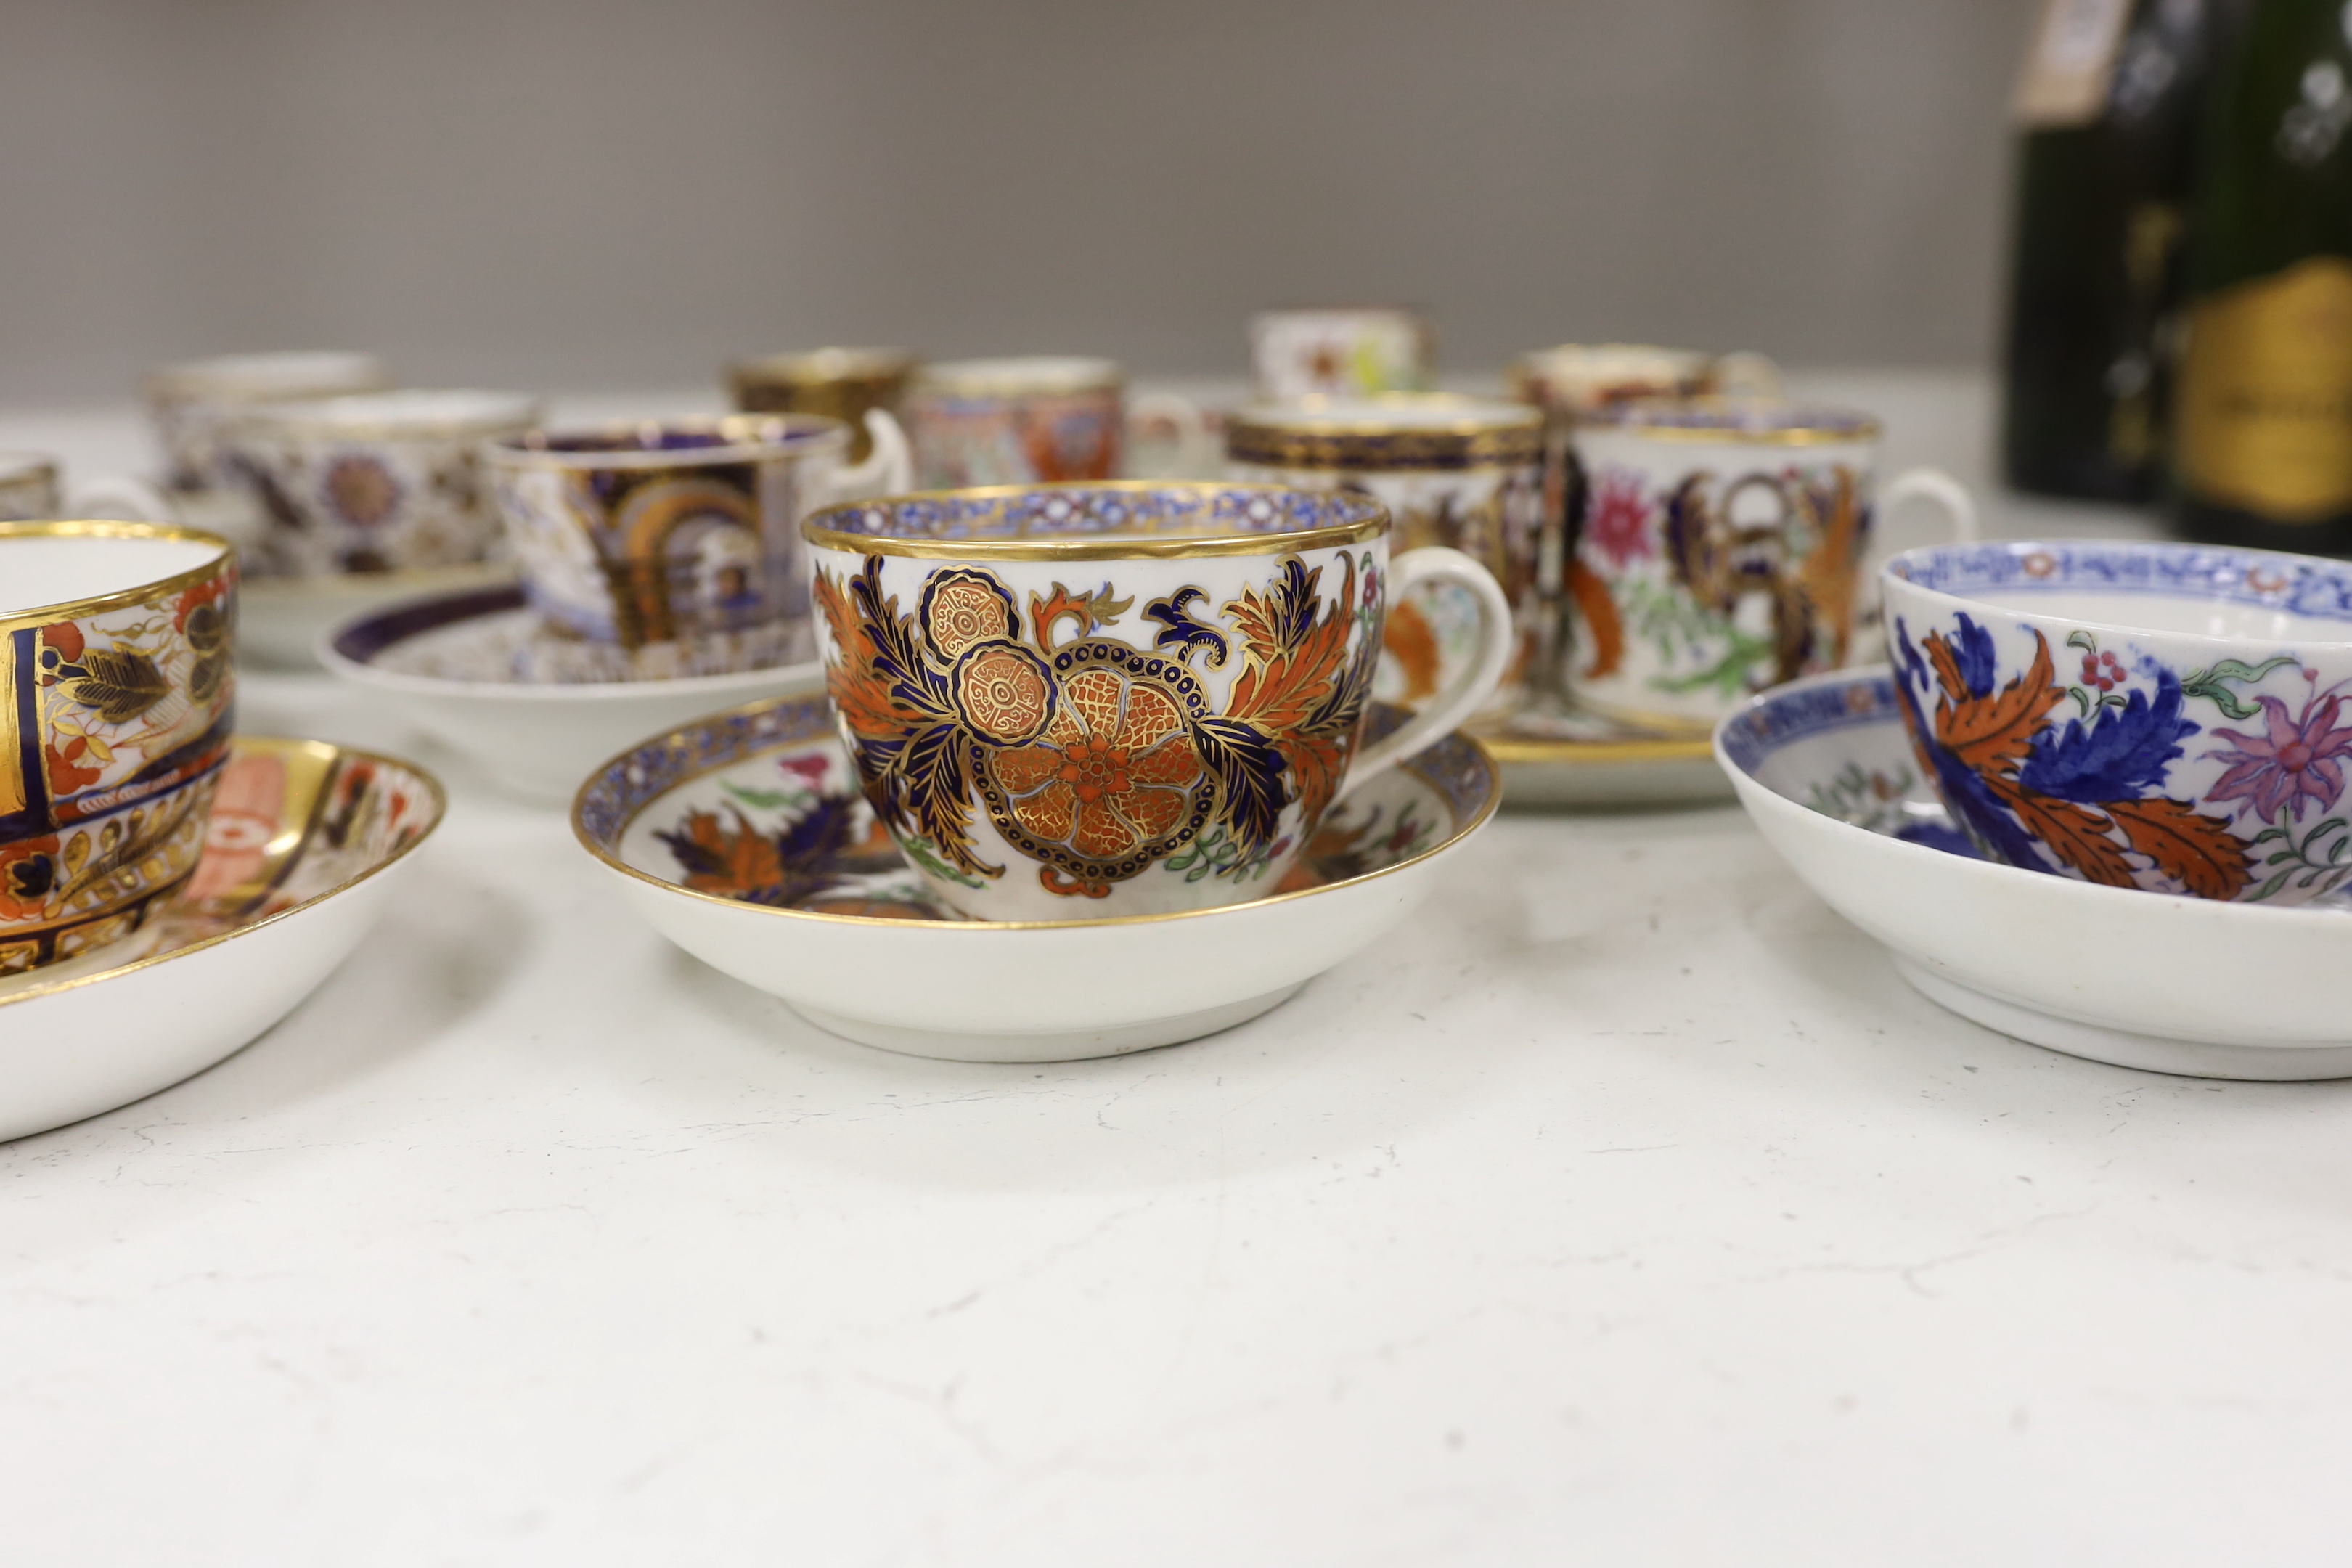 Six mixed English 1800-1820 porcelain cabinet cups and saucers, three similar coffee cans and saucers, a matching spoon stand and two coffee cans, a saucer dish, coffee can plus saucer and a tea bowl and matching saucer